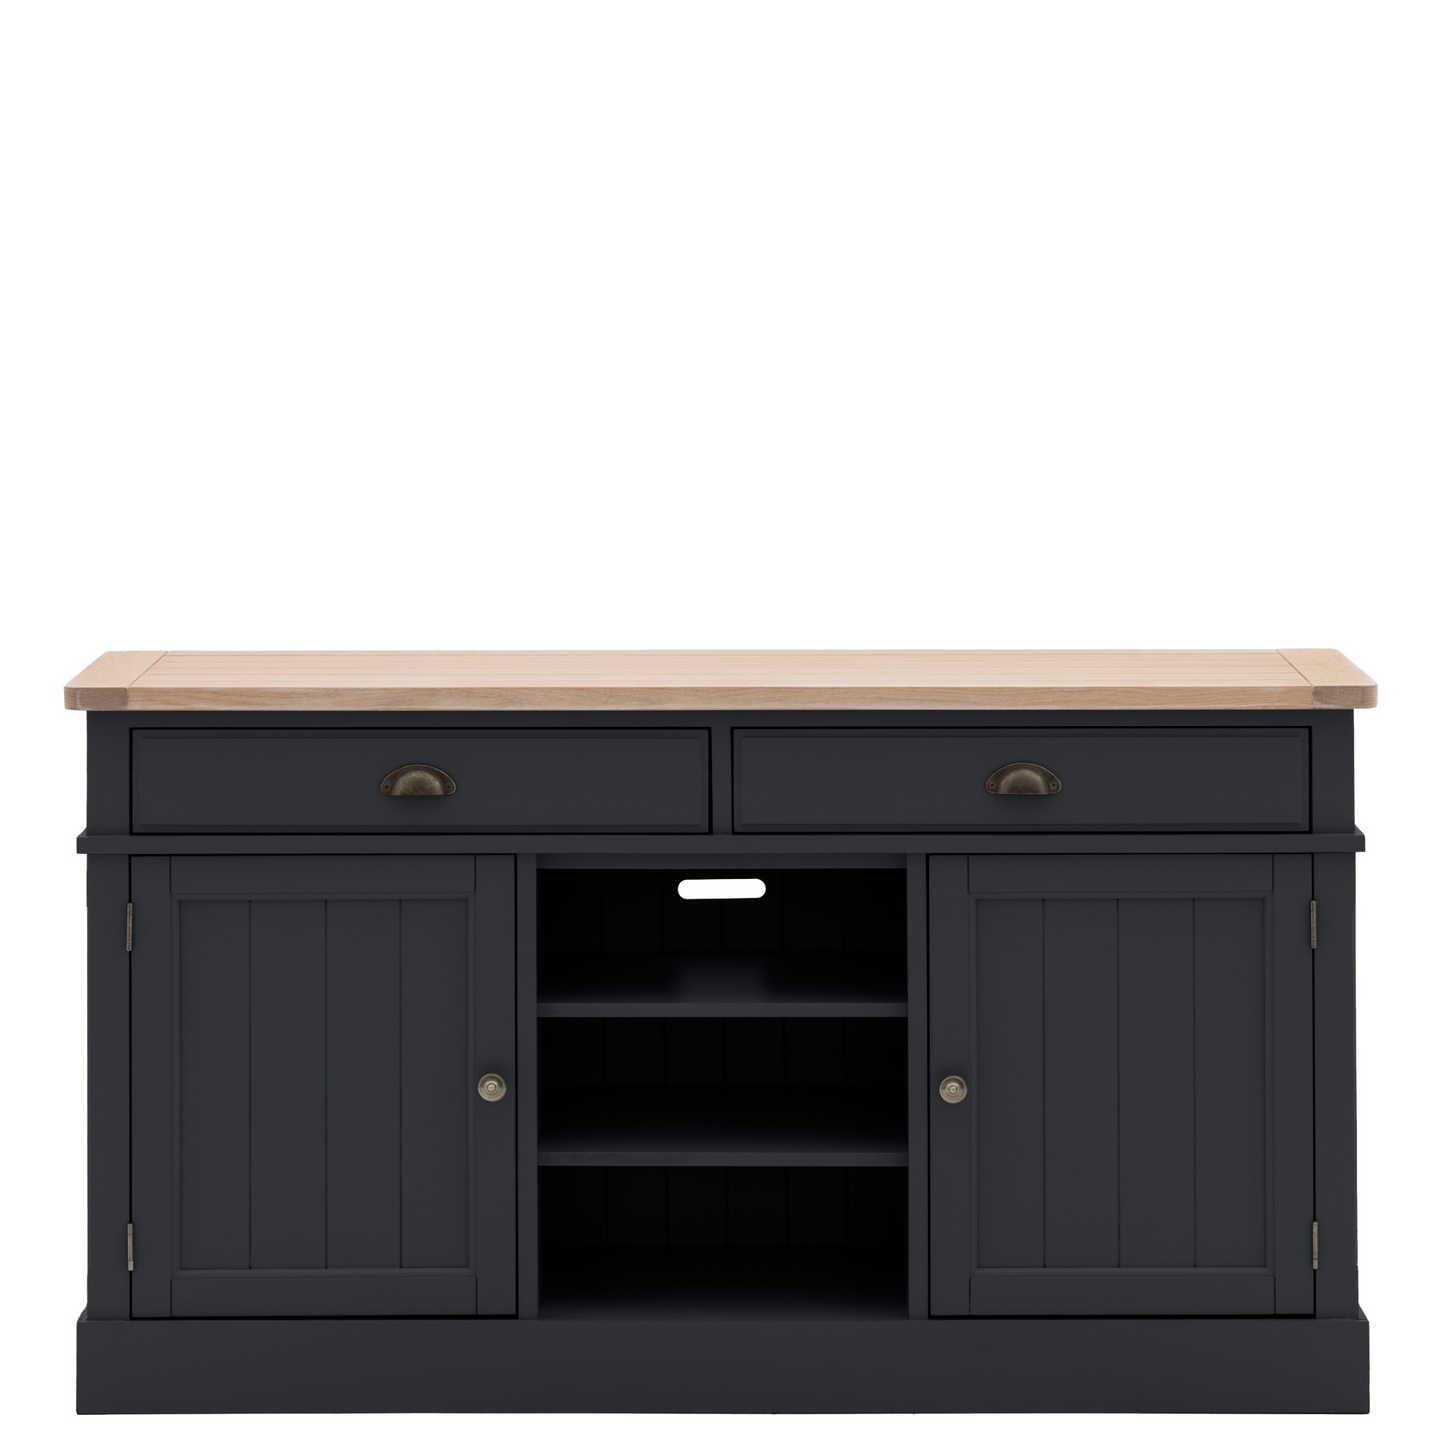 A black Buckland 2 Door 2 Drawer Sideboard in Meteor from Kikiathome.co.uk, perfect for interior decor and home furniture.